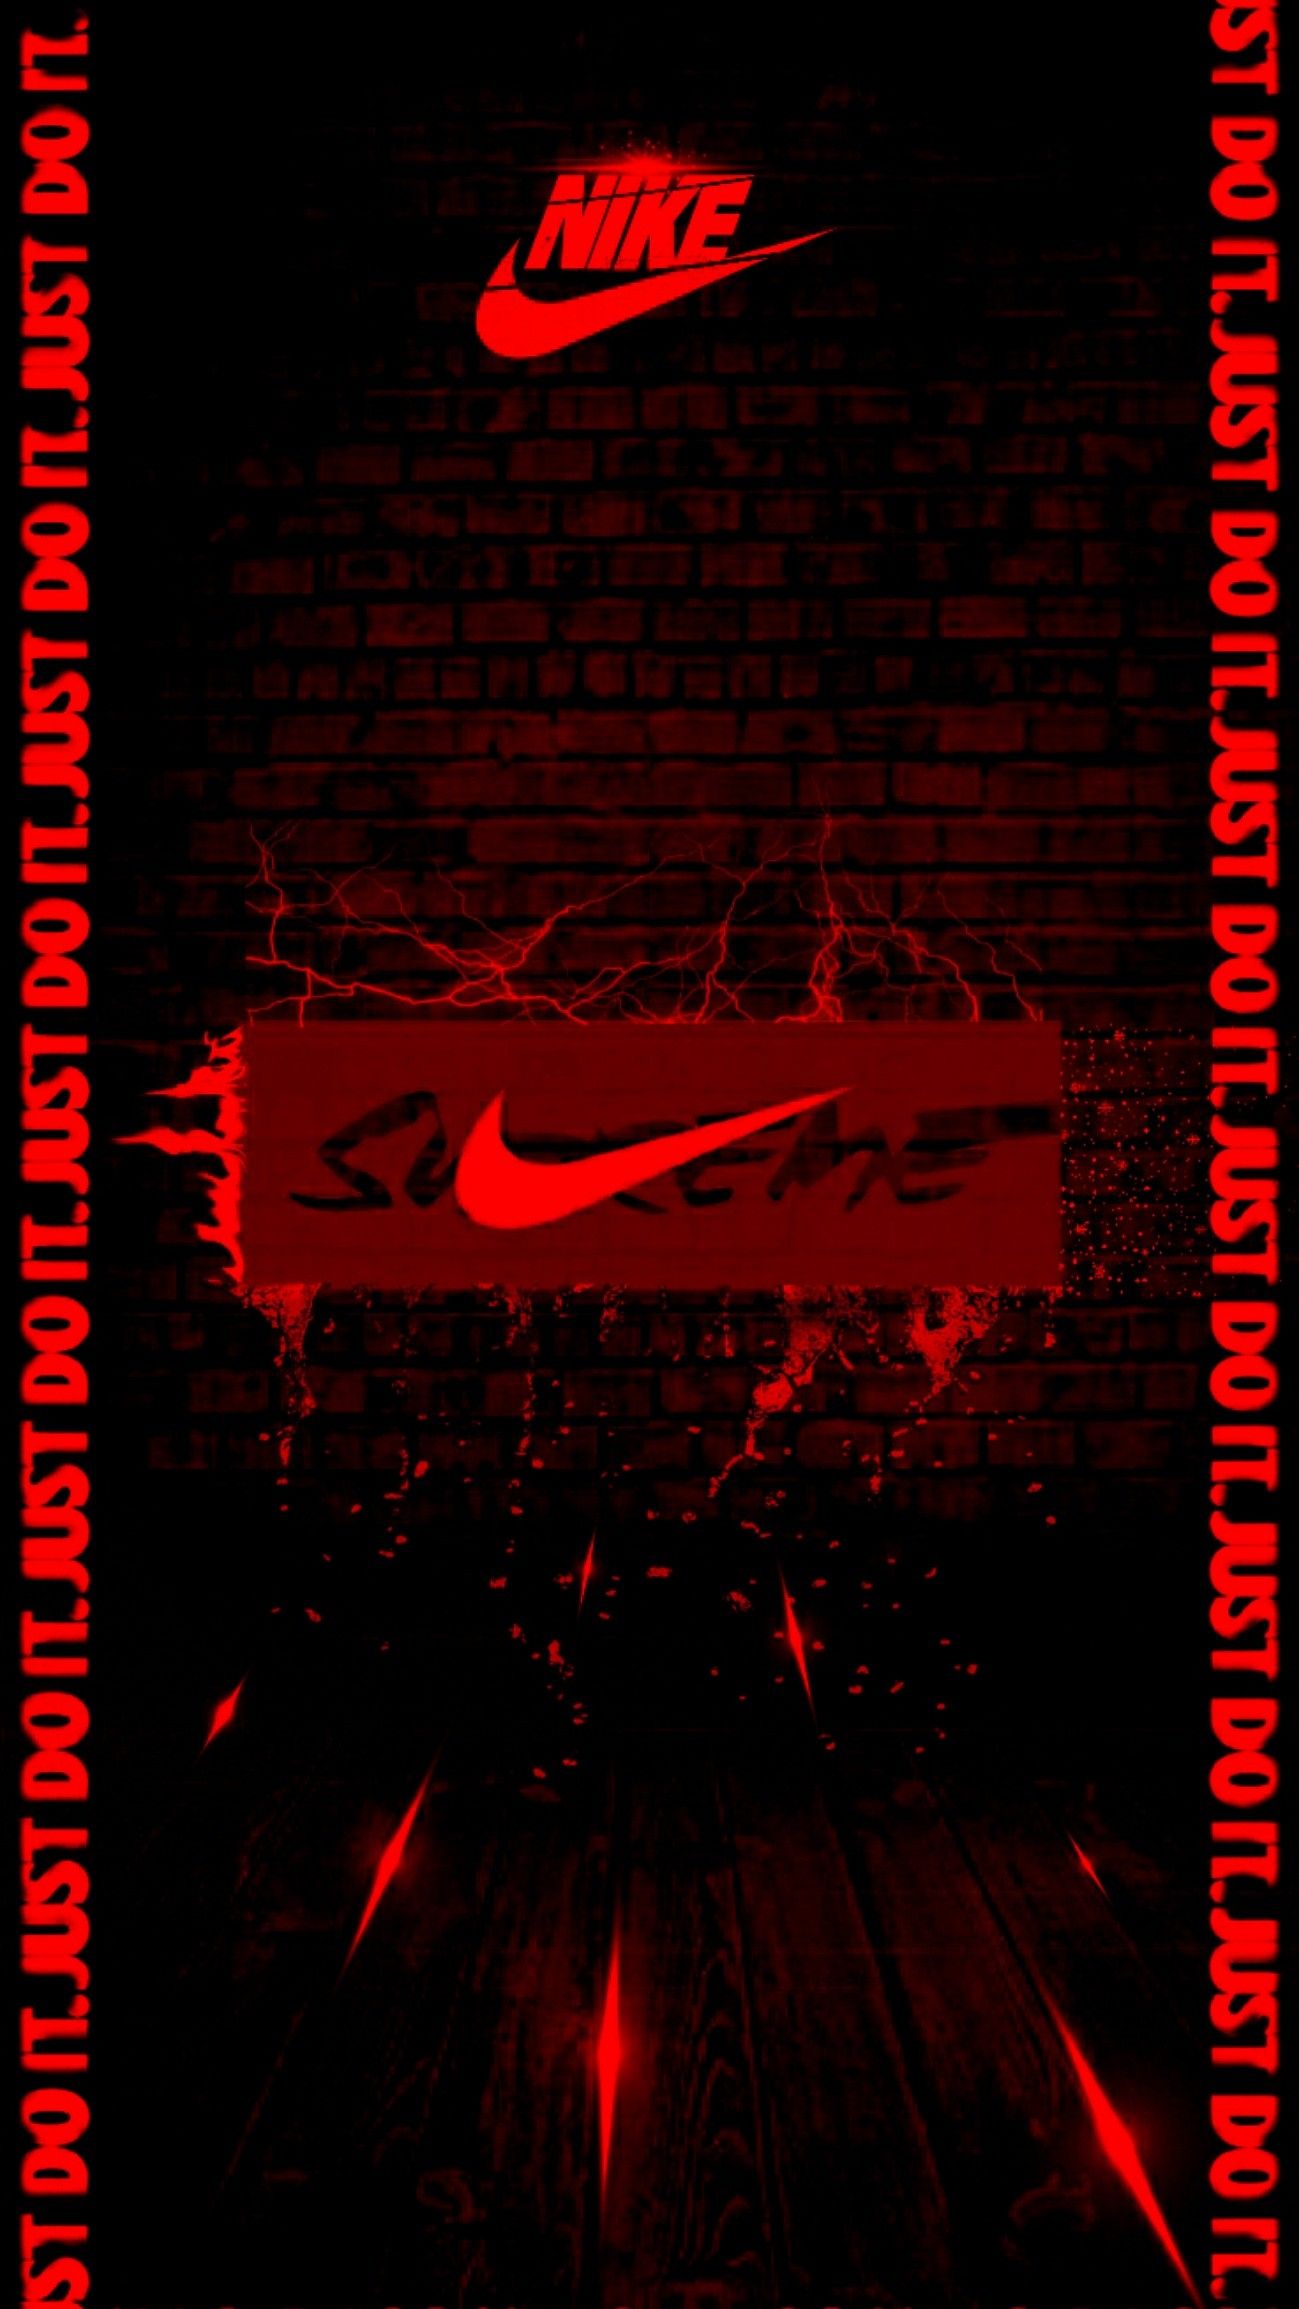 Pin by hooters konceptz on nike wallpaper nike wallpaper jordan logo wallpaper neon jordan wallpaper